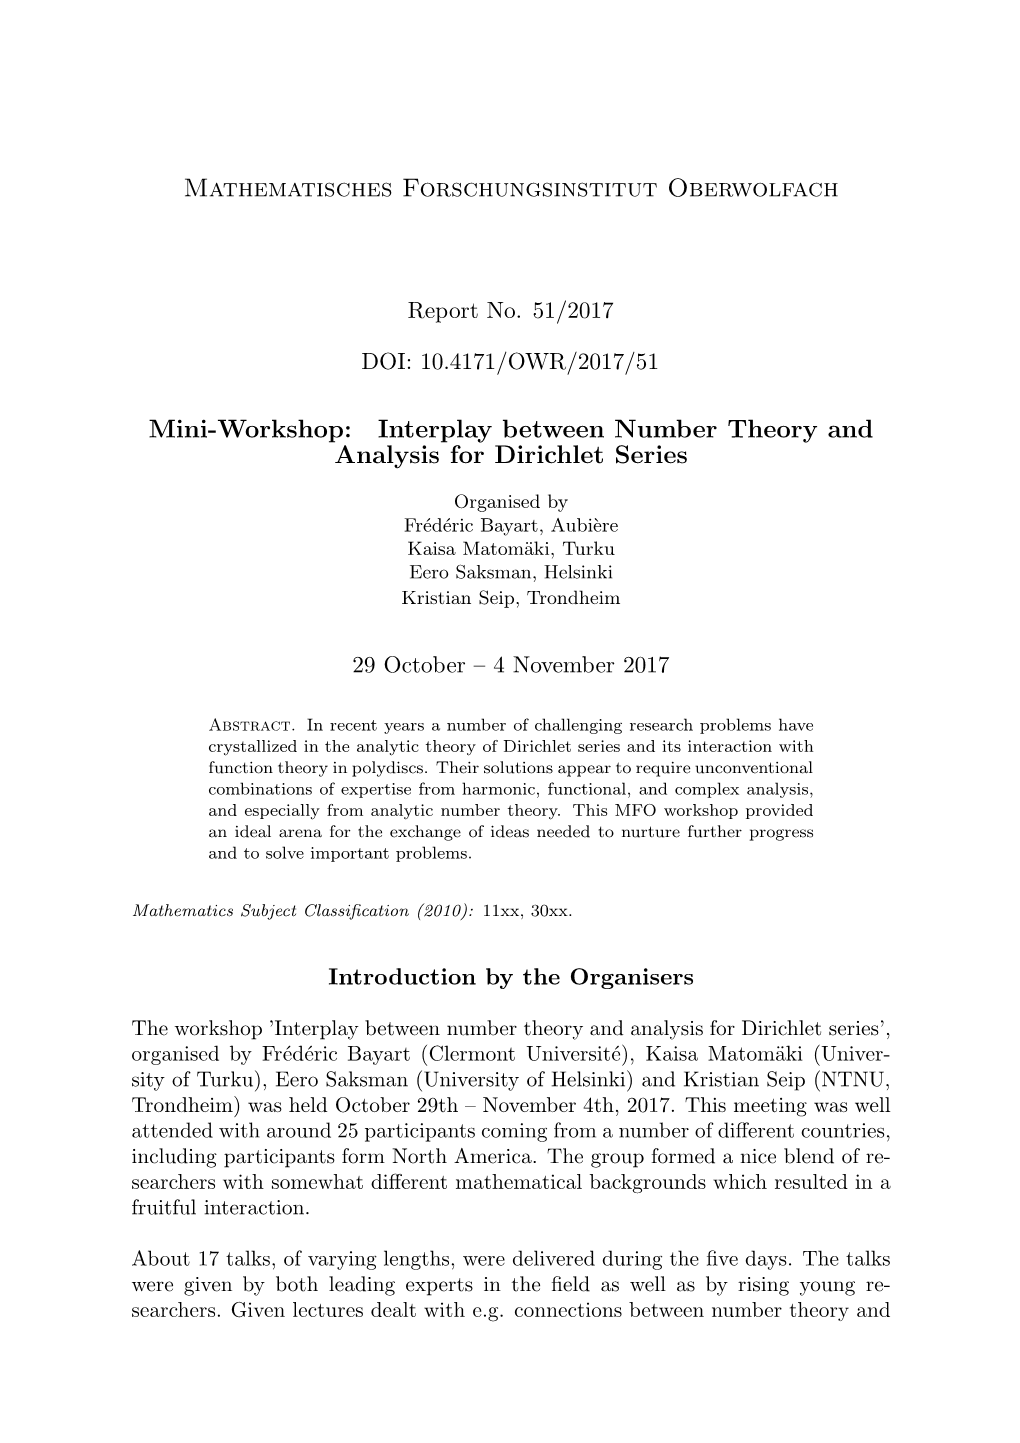 Interplay Between Number Theory and Analysis for Dirichlet Series